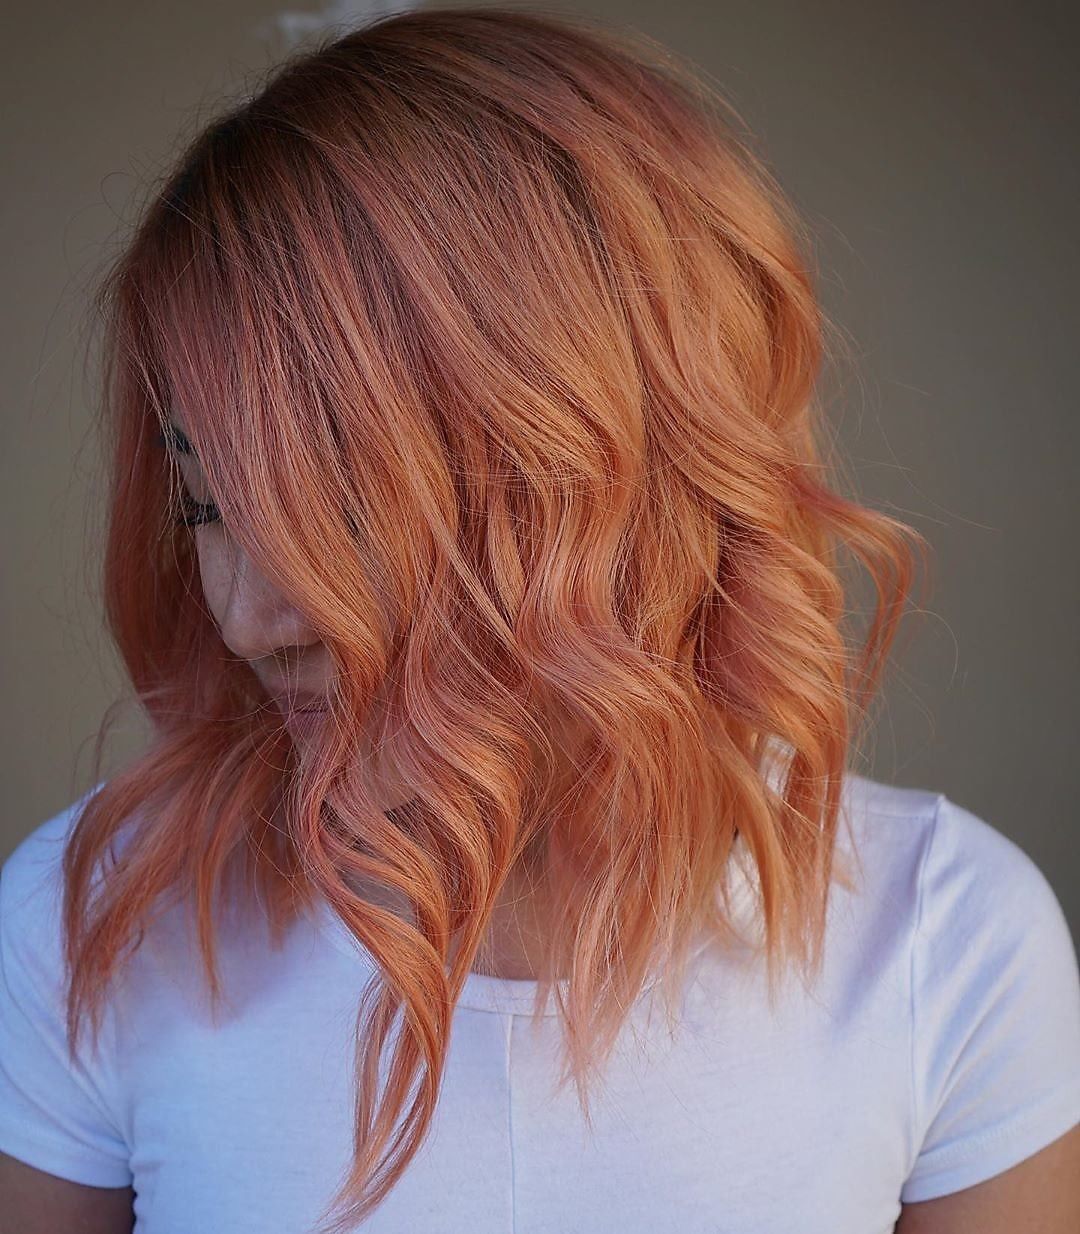 Schwarzkopf Professional - Hey peach! 🍑
*Formula* 👉 @shaynbrain with #IGORAVIBRANCE. Roots – 7-77 + 5-57. Ends – 9.5-18 + 9.5-17, all with 1.9% Activator Gel/Lotion.
#IGORA #MOREVIBRANCE #redhair #cop...